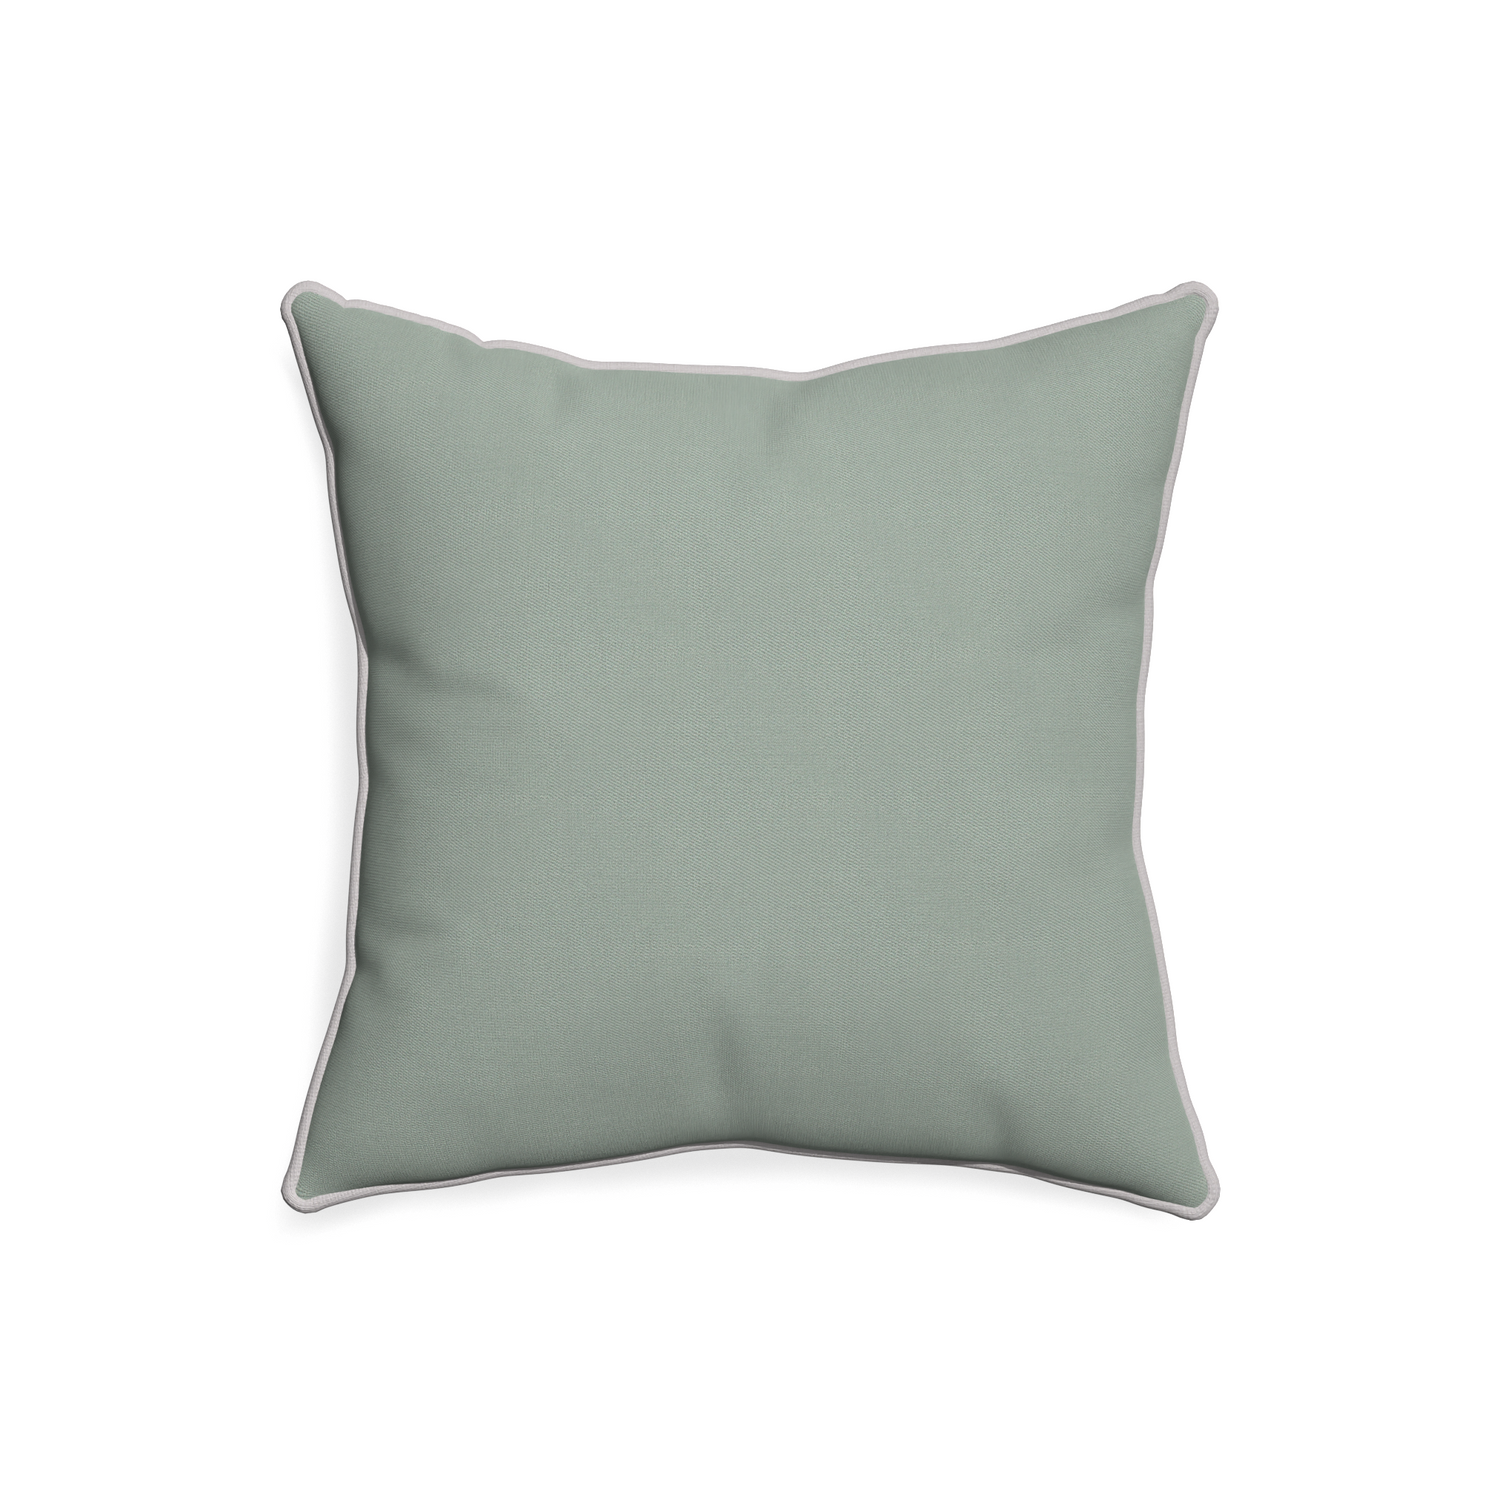 20-square sage custom sage green cottonpillow with pebble piping on white background